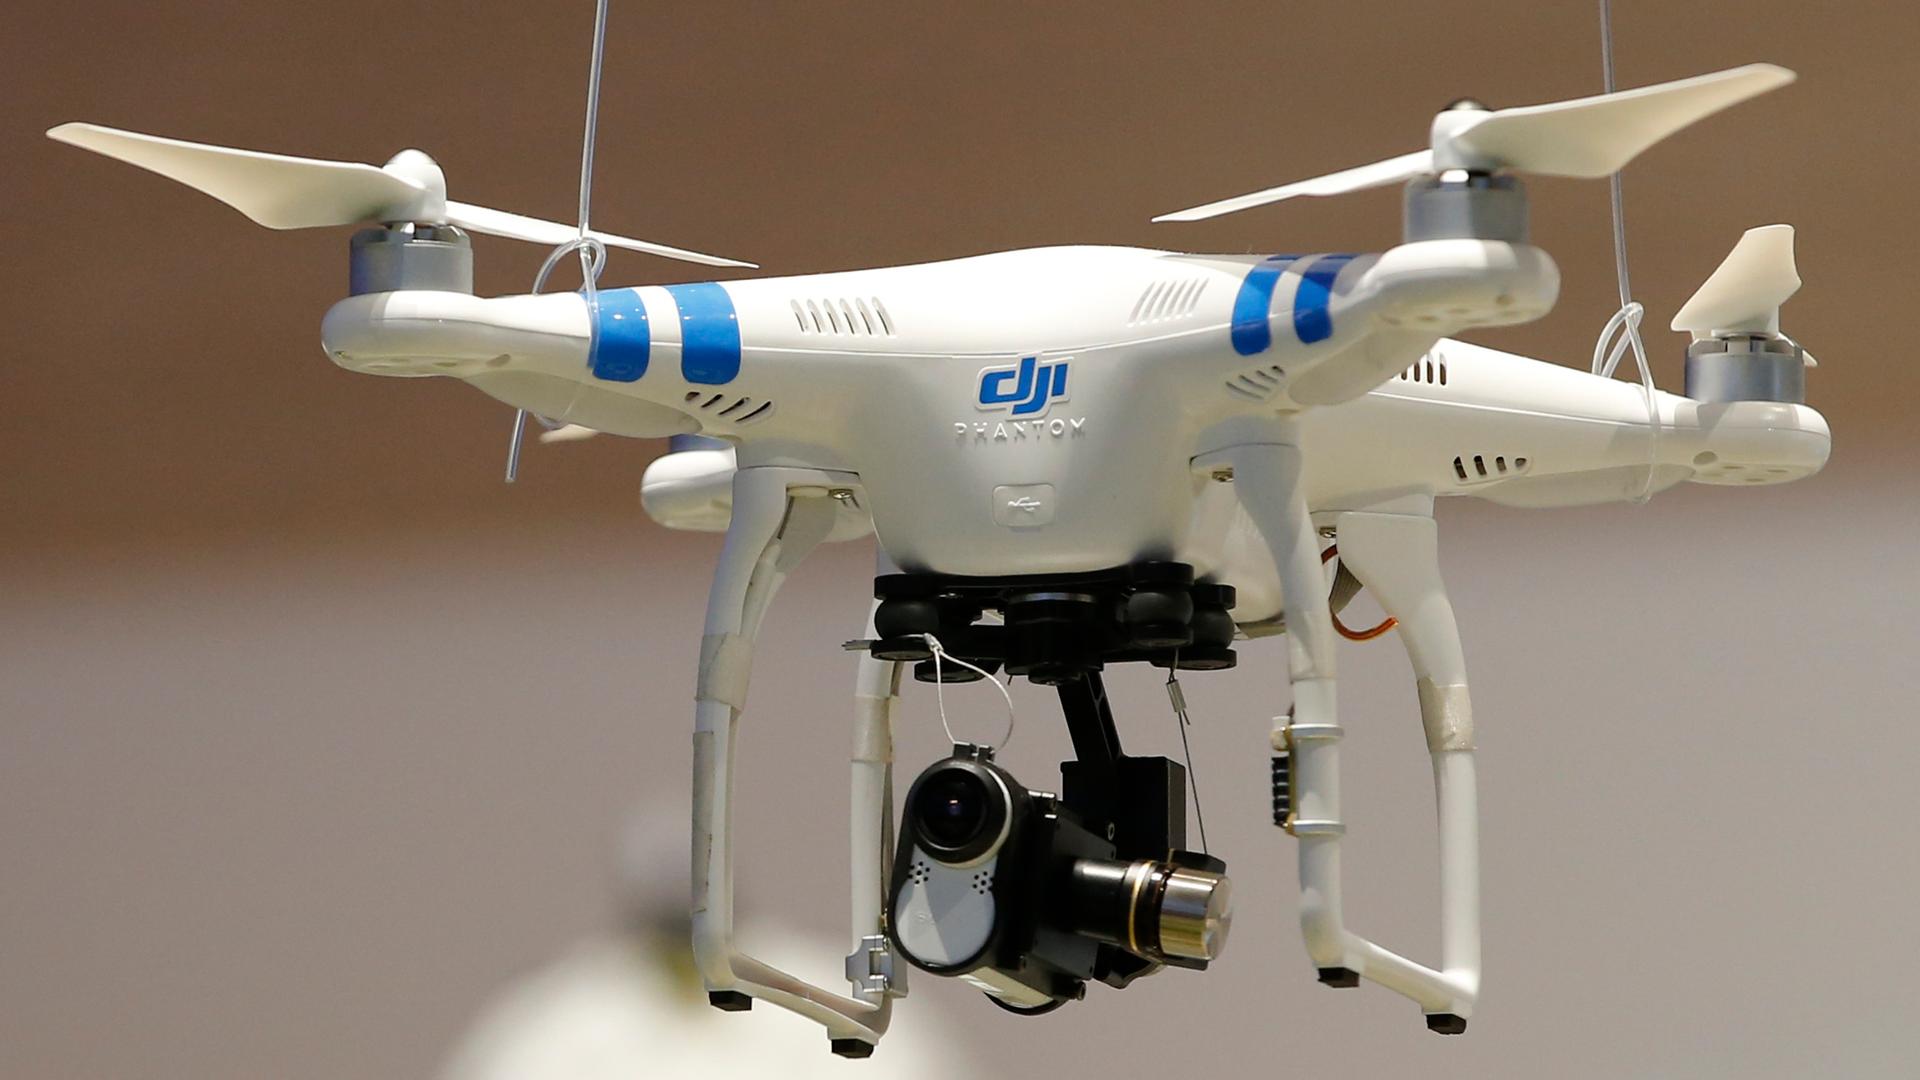 A drone with Sony Action Cam Mini is pictured at the IFA consumer technology fair in Berlin, September 5, 2014.